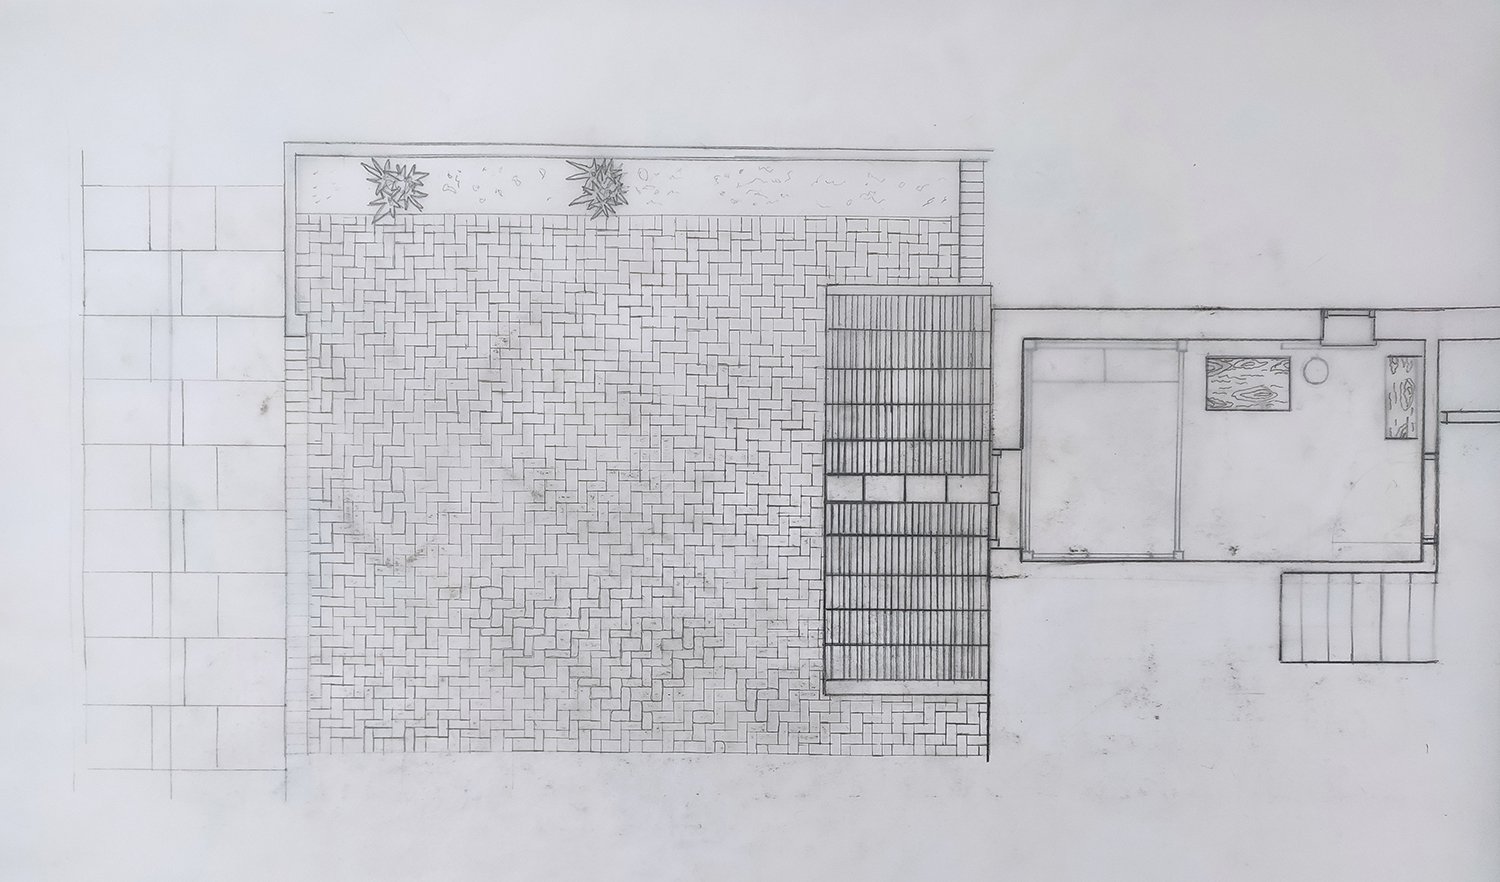 A plan drawing of the pavement in front of a house, showing also the inside plan of a room